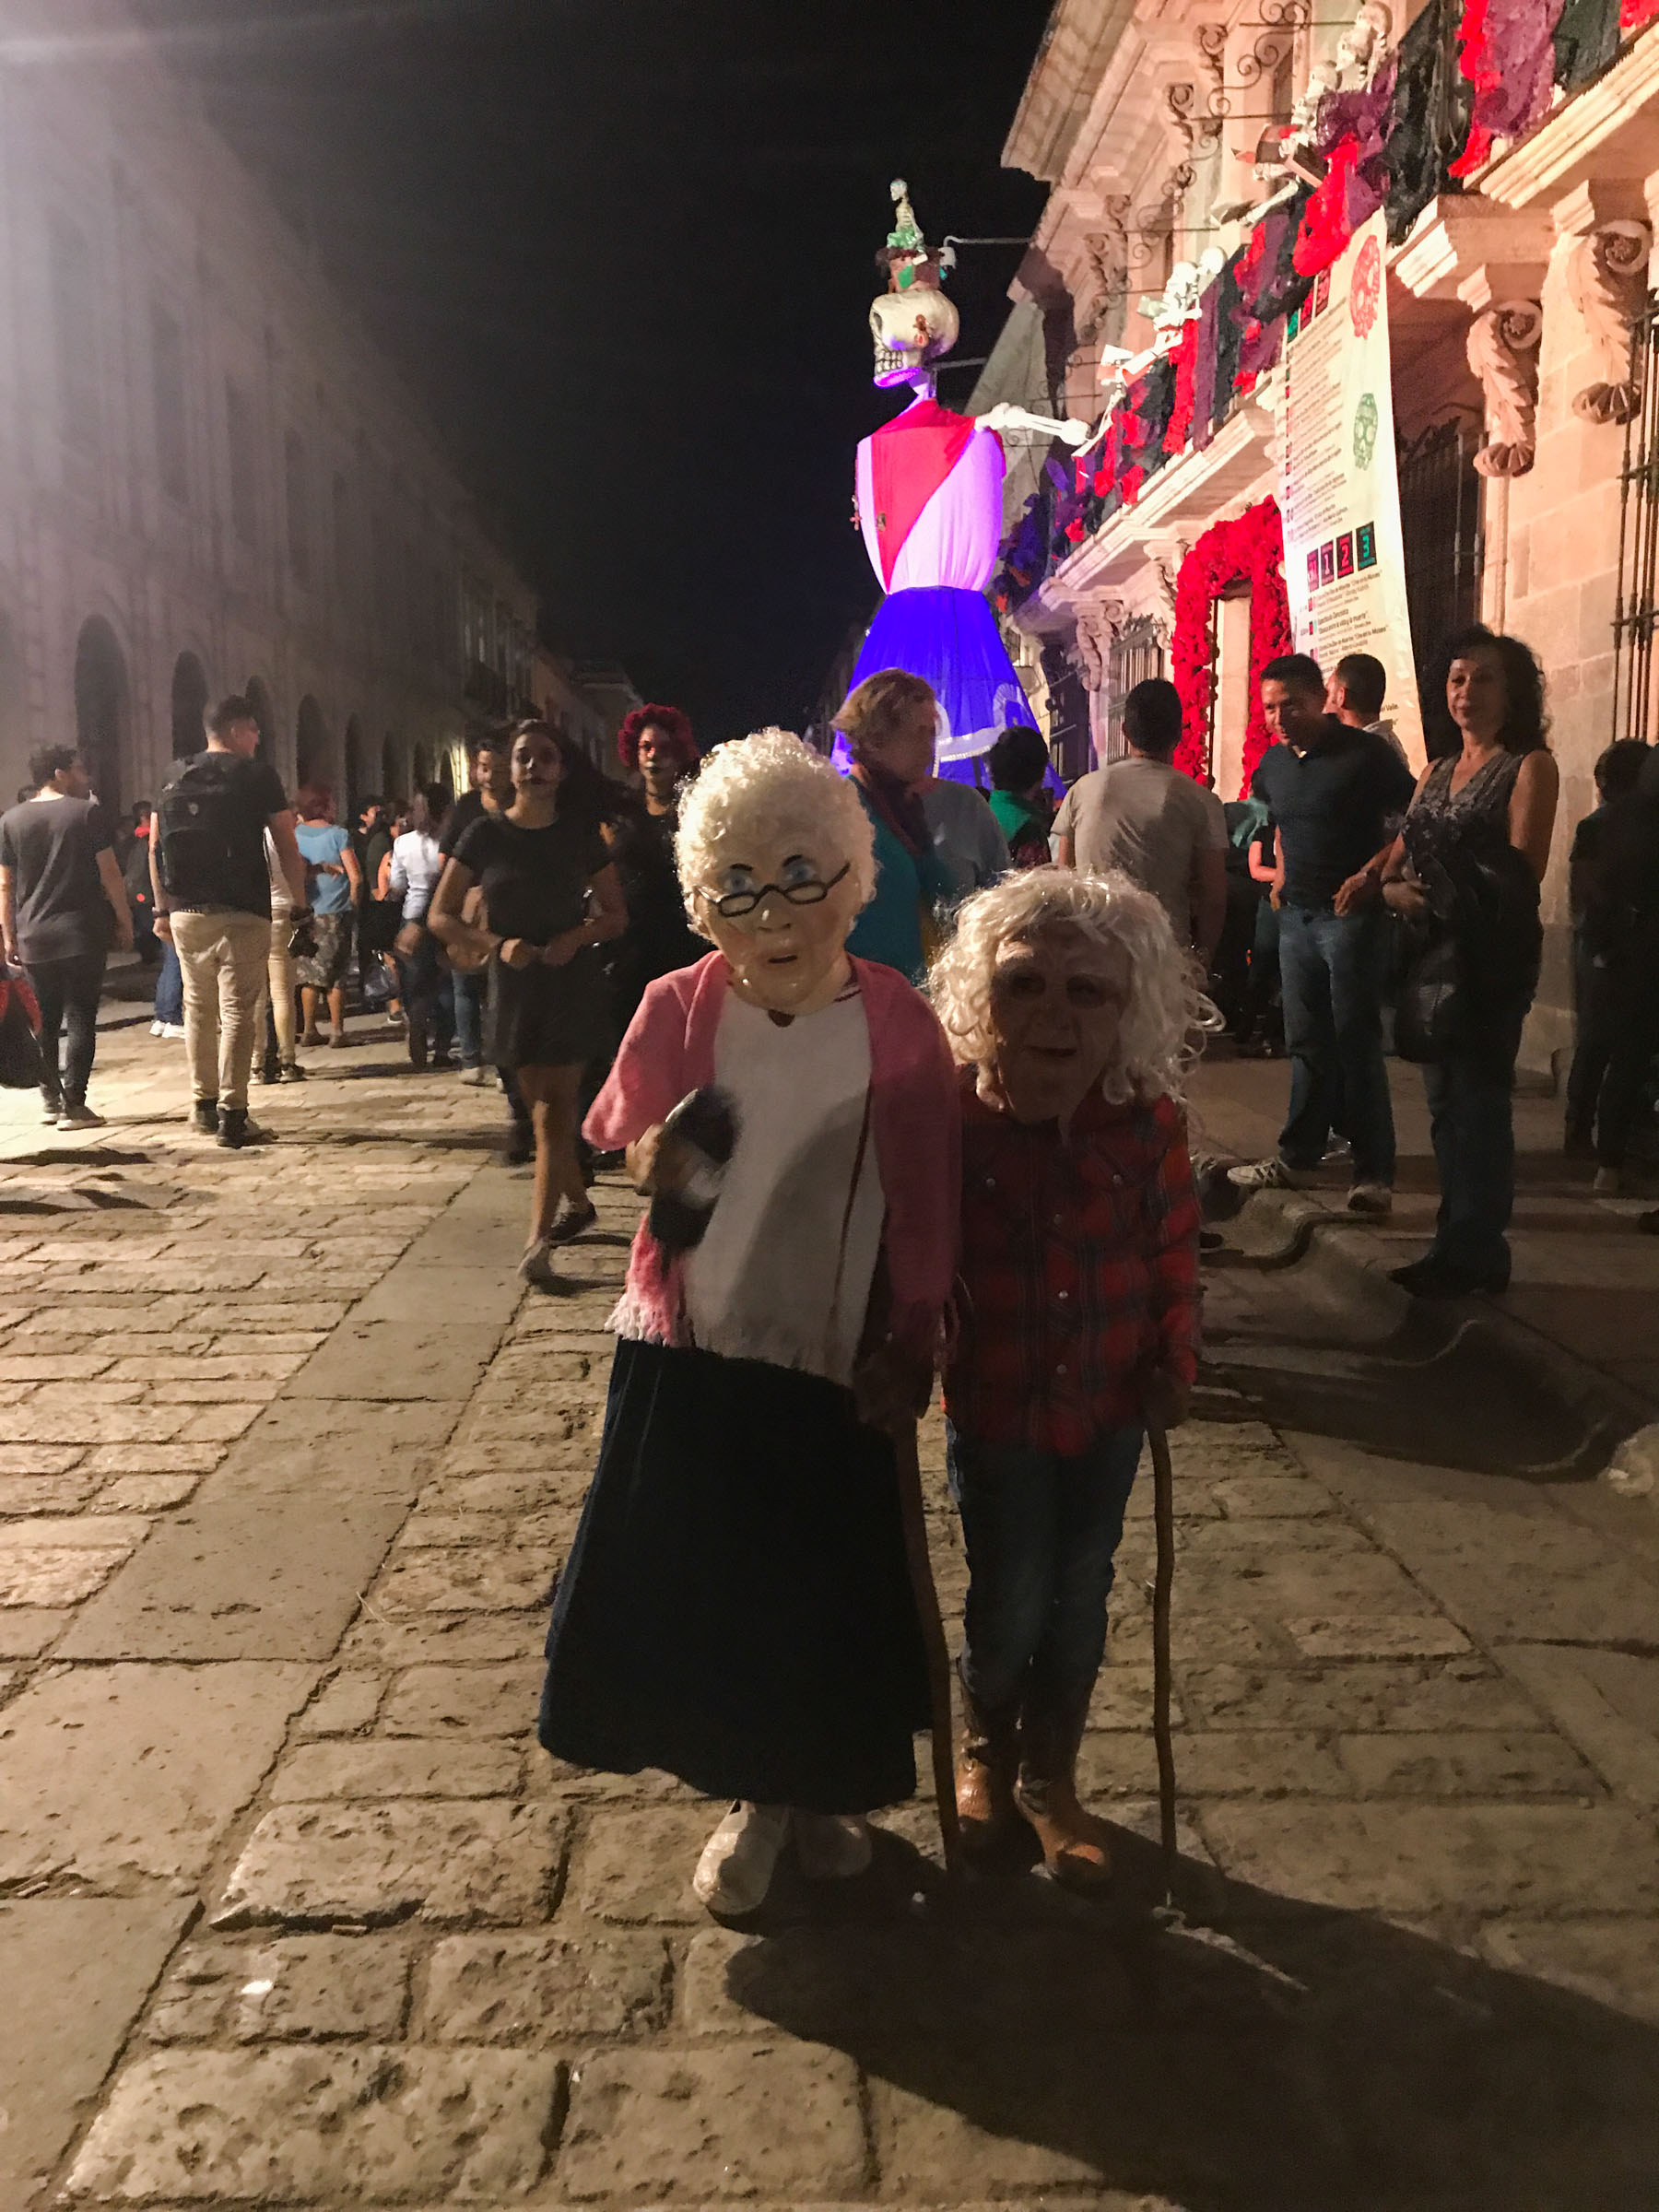 Fun Things to Experience in Mexico for Day of the Dead - Oaxaca // Notjessfashion.com